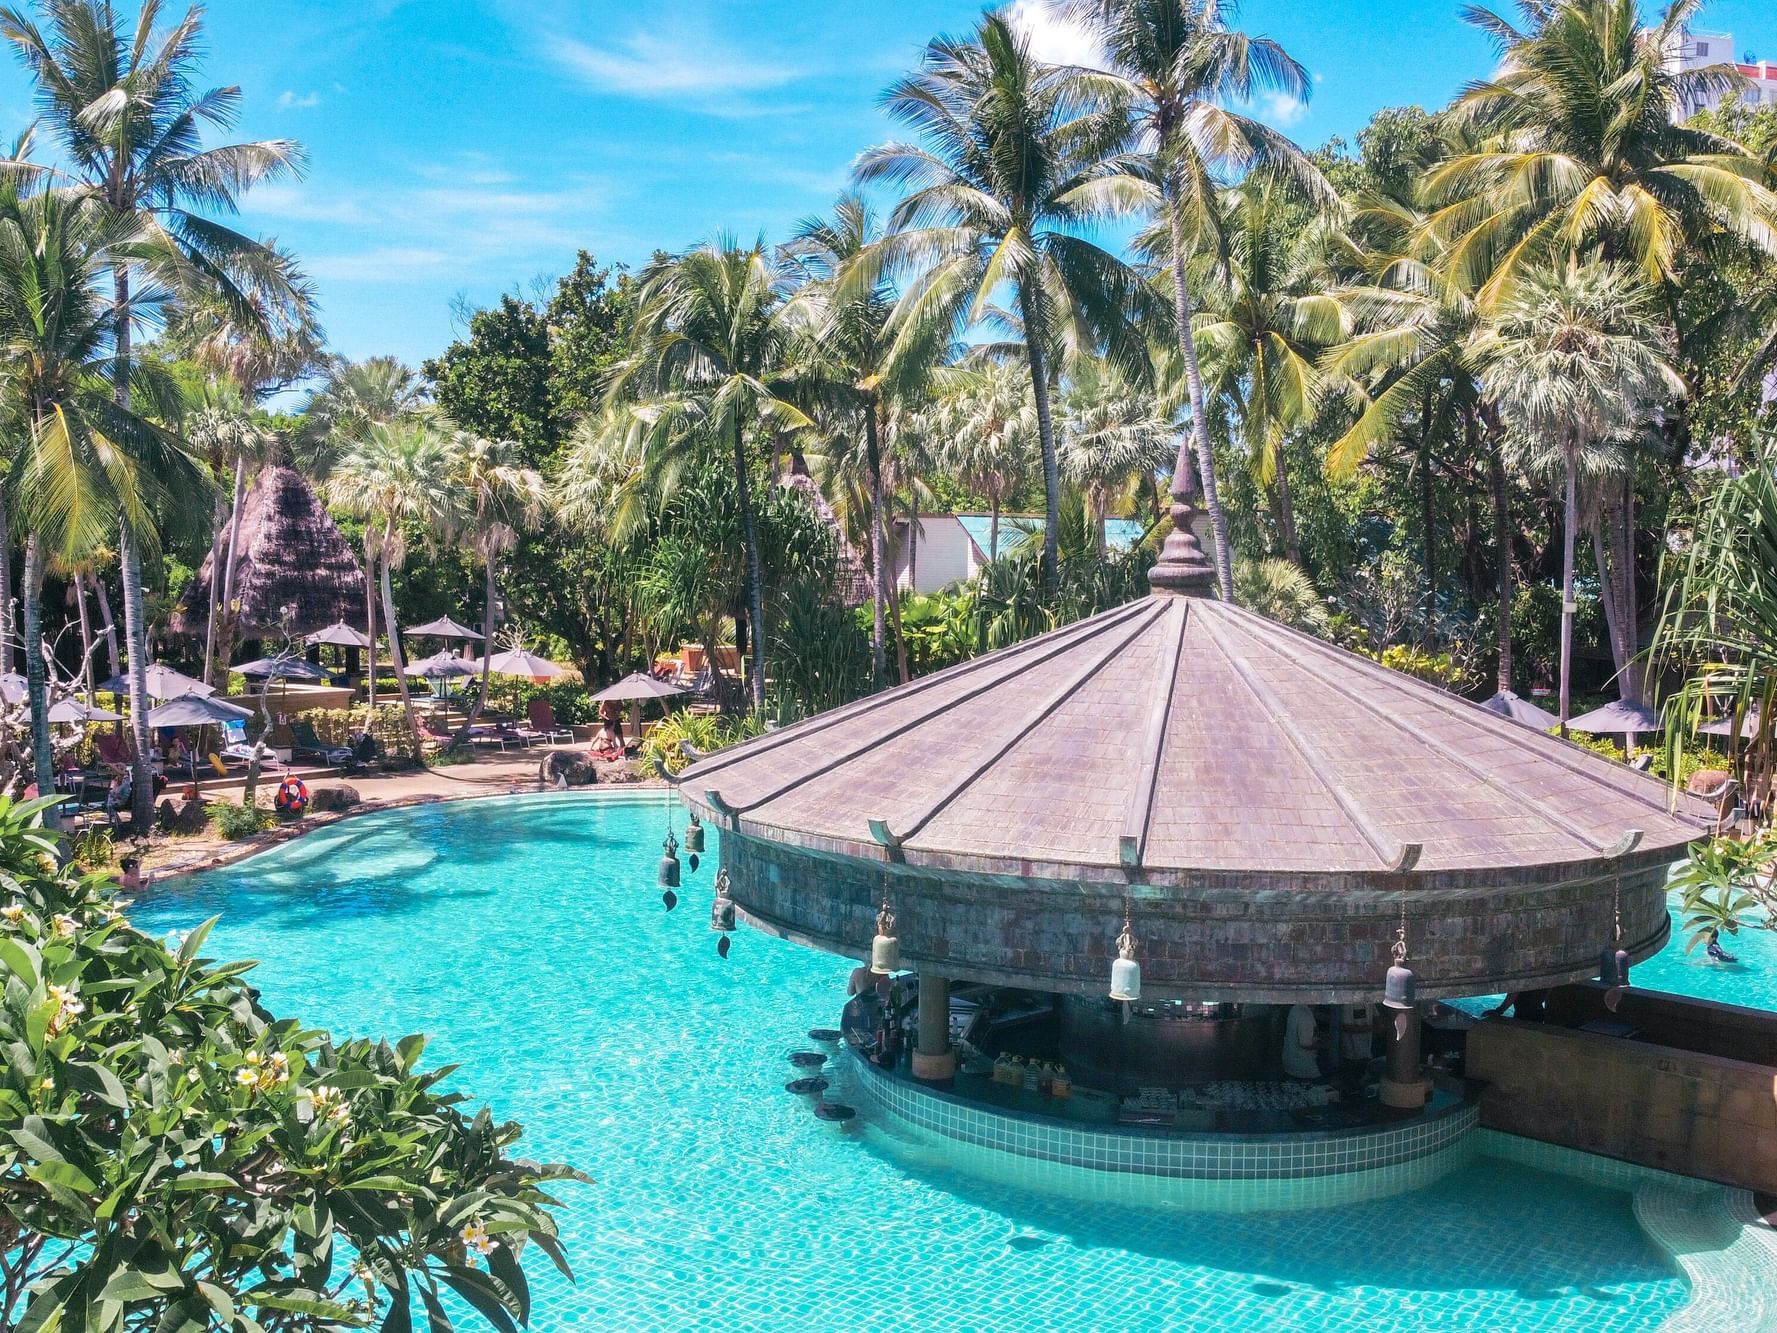 Main Pool and Pool bar are surrounded by the tropical and coconut trees on the sunny day